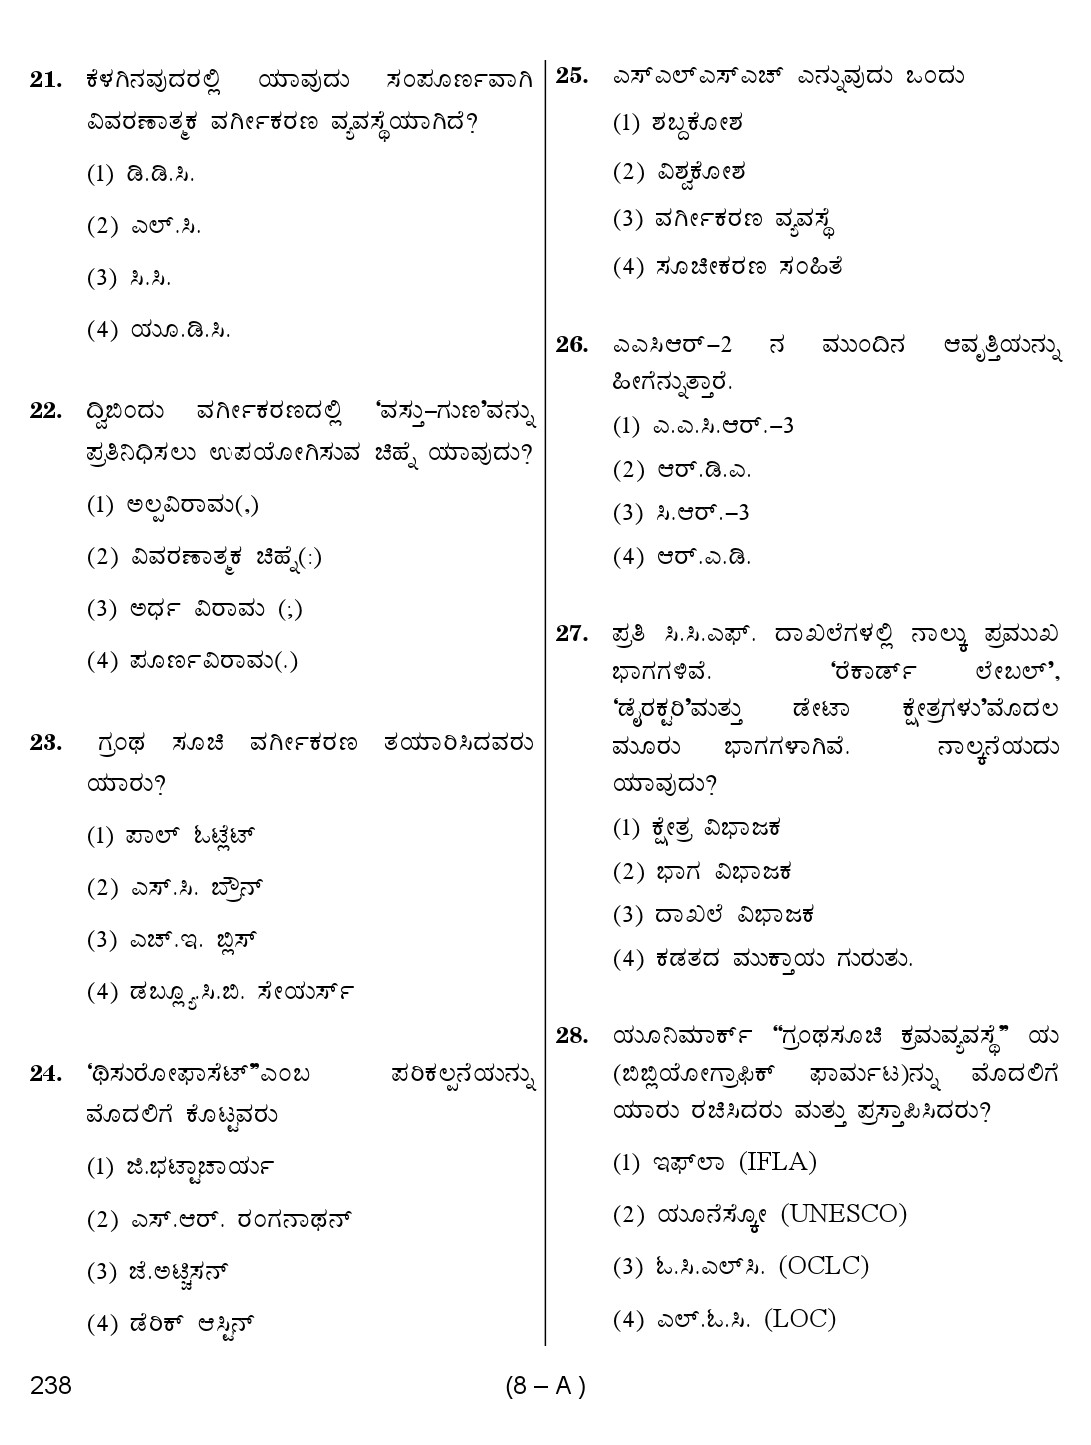 Karnataka PSC 238 Specific Paper II Librarian Exam Sample Question Paper 8